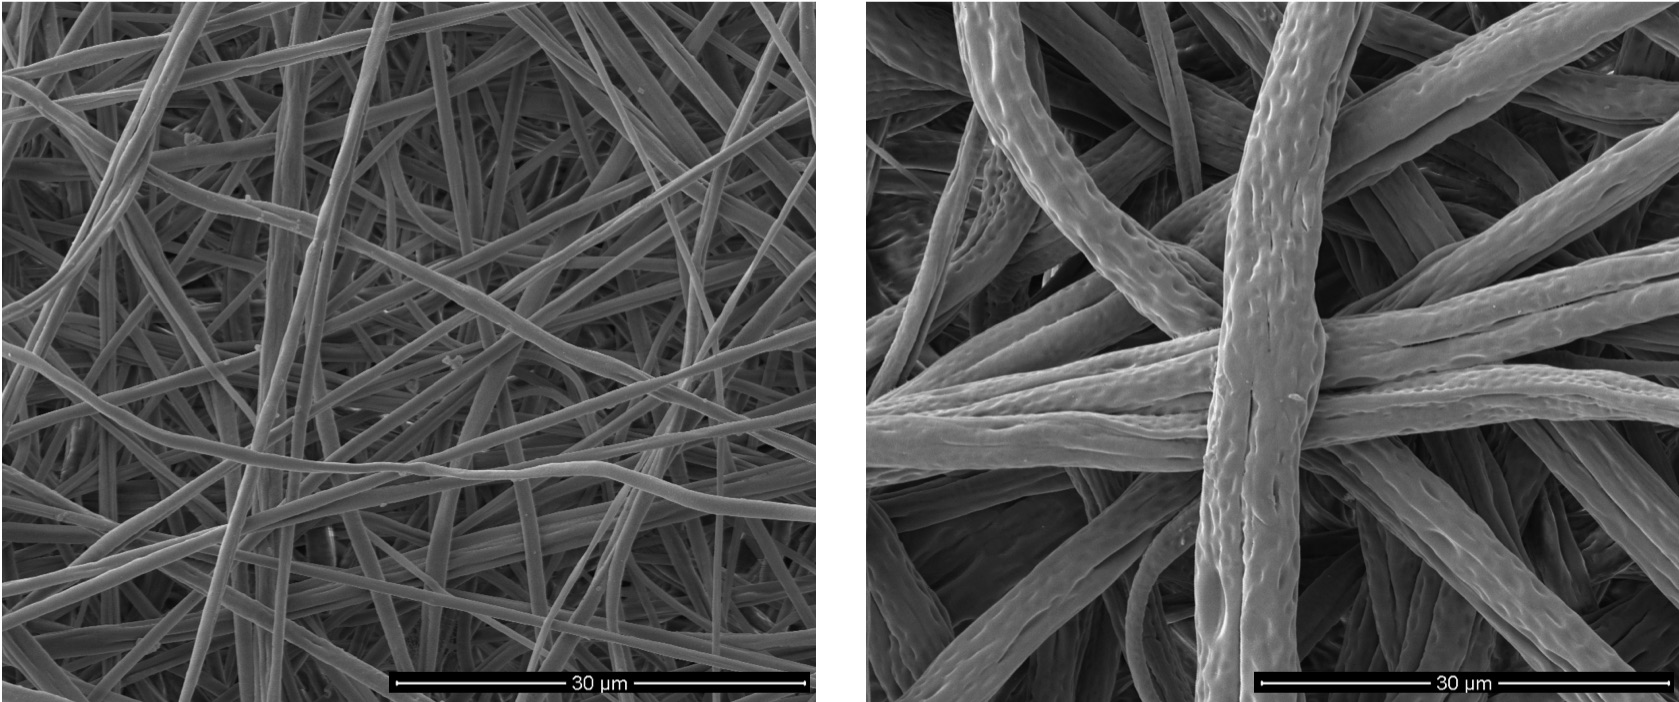 Difference in fiber diameter and surface roughness of polymer fibers